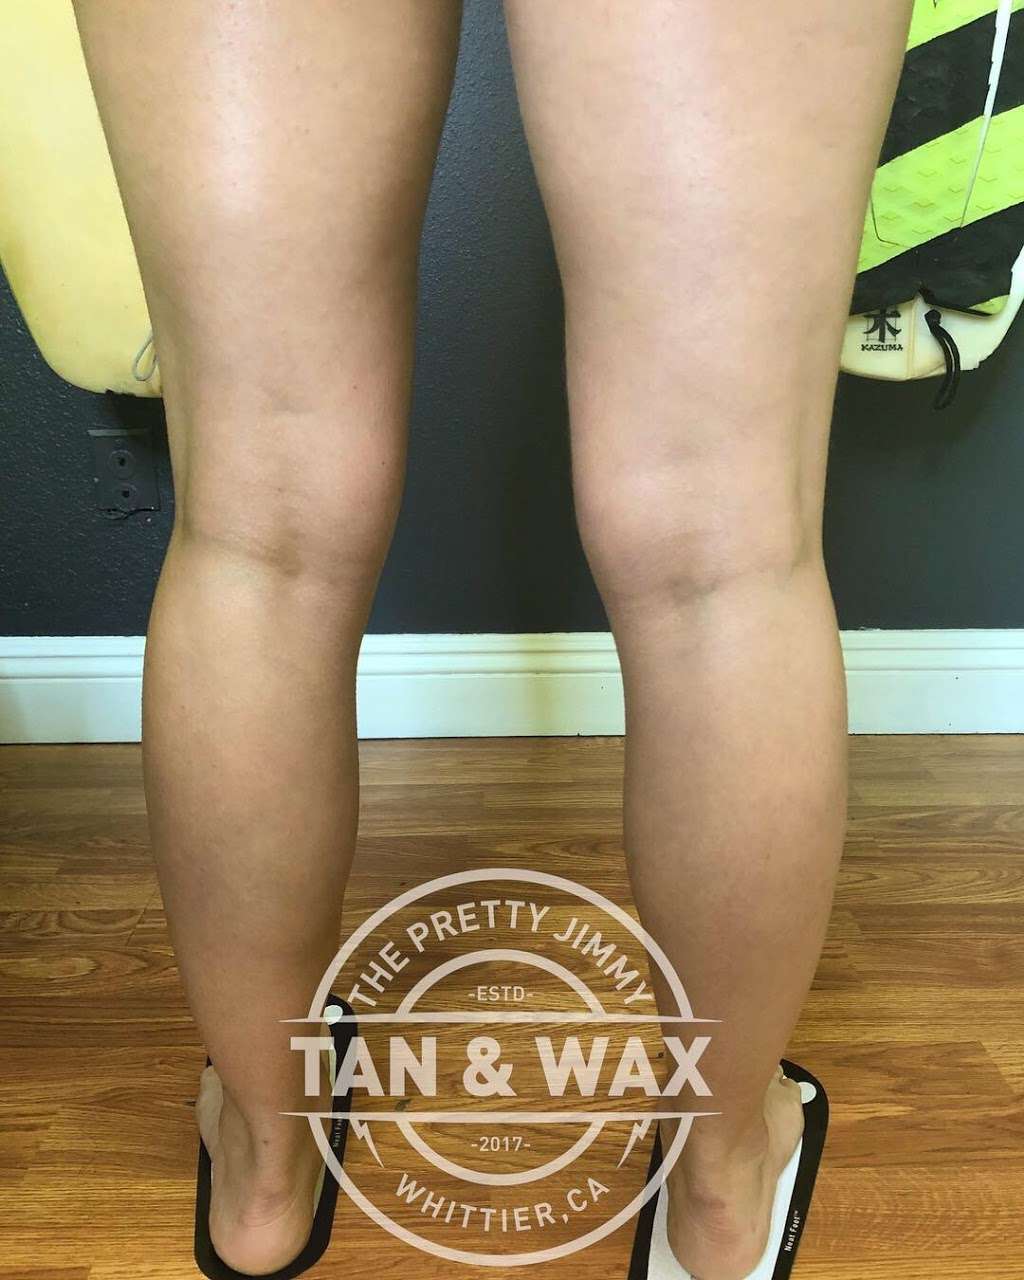 The Pretty Jimmy Tan & Wax | 8317 Painter Ave #3, Whittier, CA 90602 | Phone: (562) 696-5566